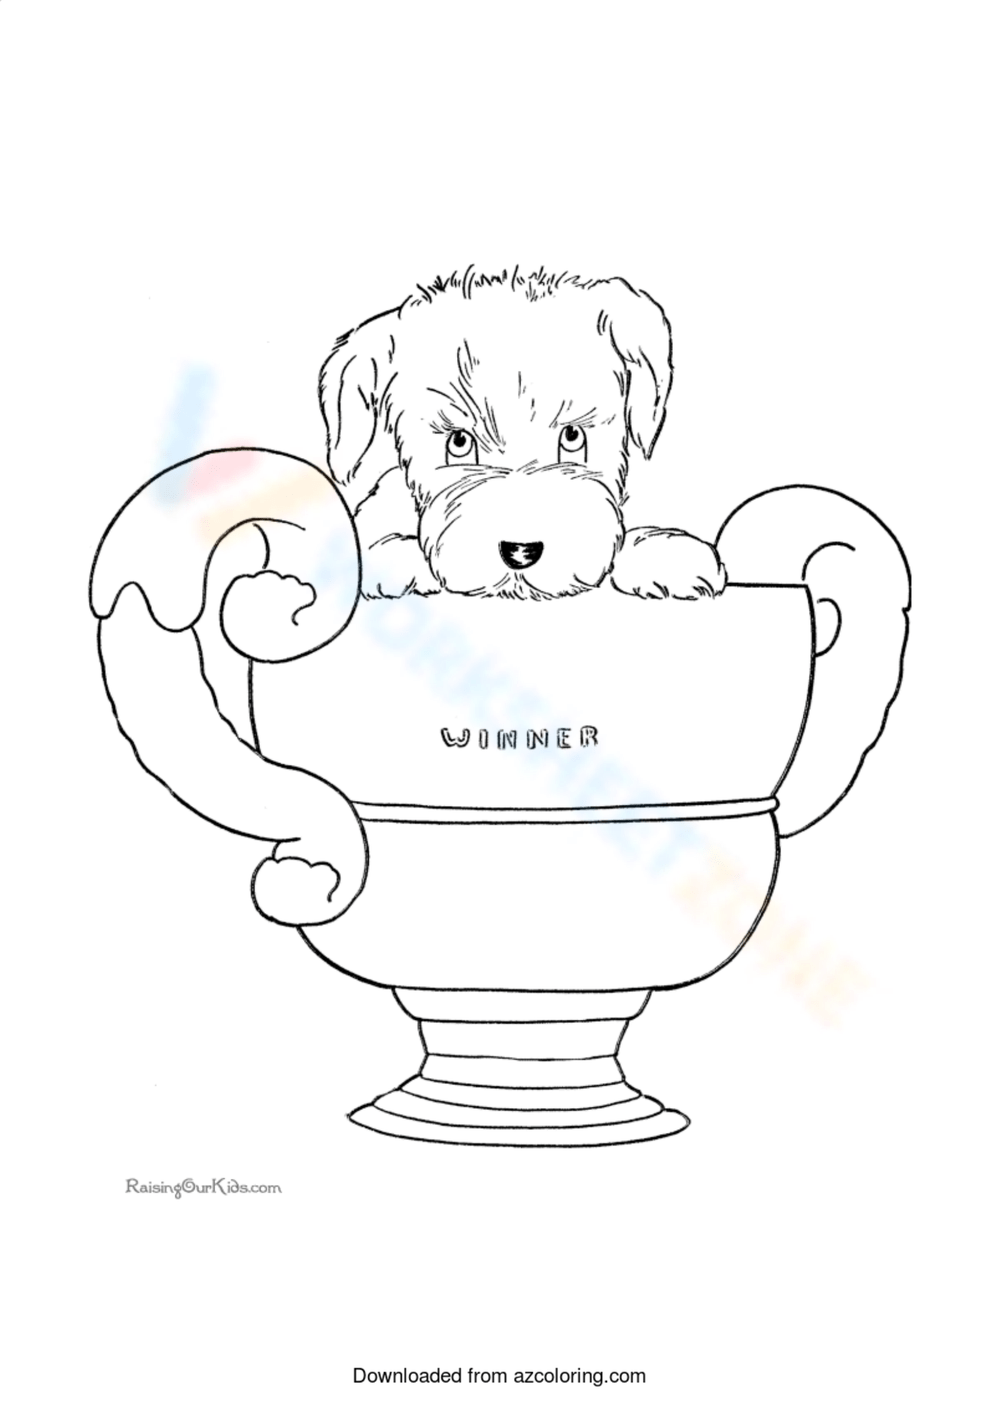 The dog winner with cup